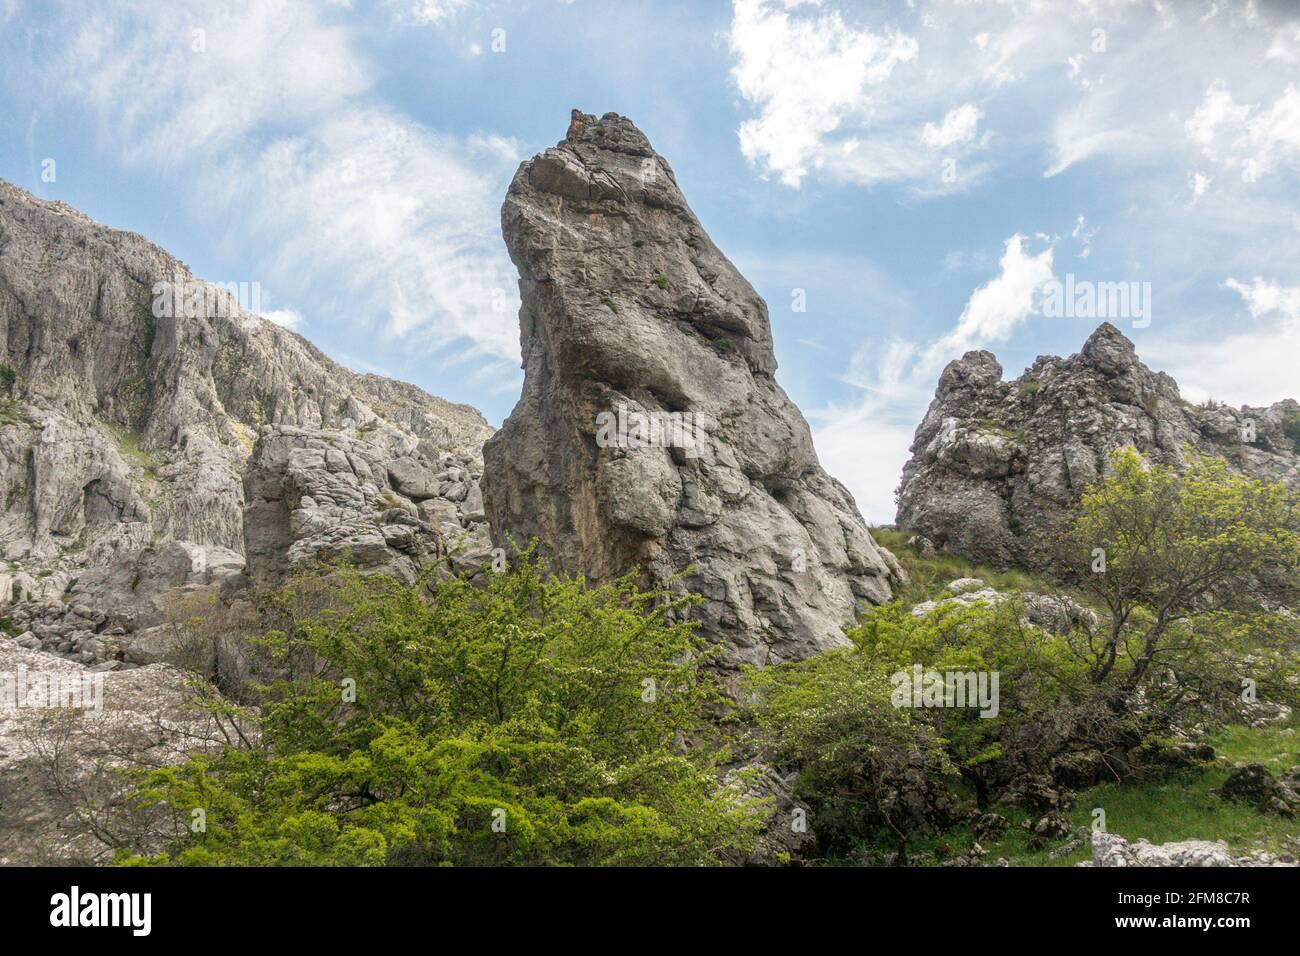 Scenic landscape of limestone formations at Sierra de Camarolos, Hondonero, Andalusia, Southern Spain Stock Photo